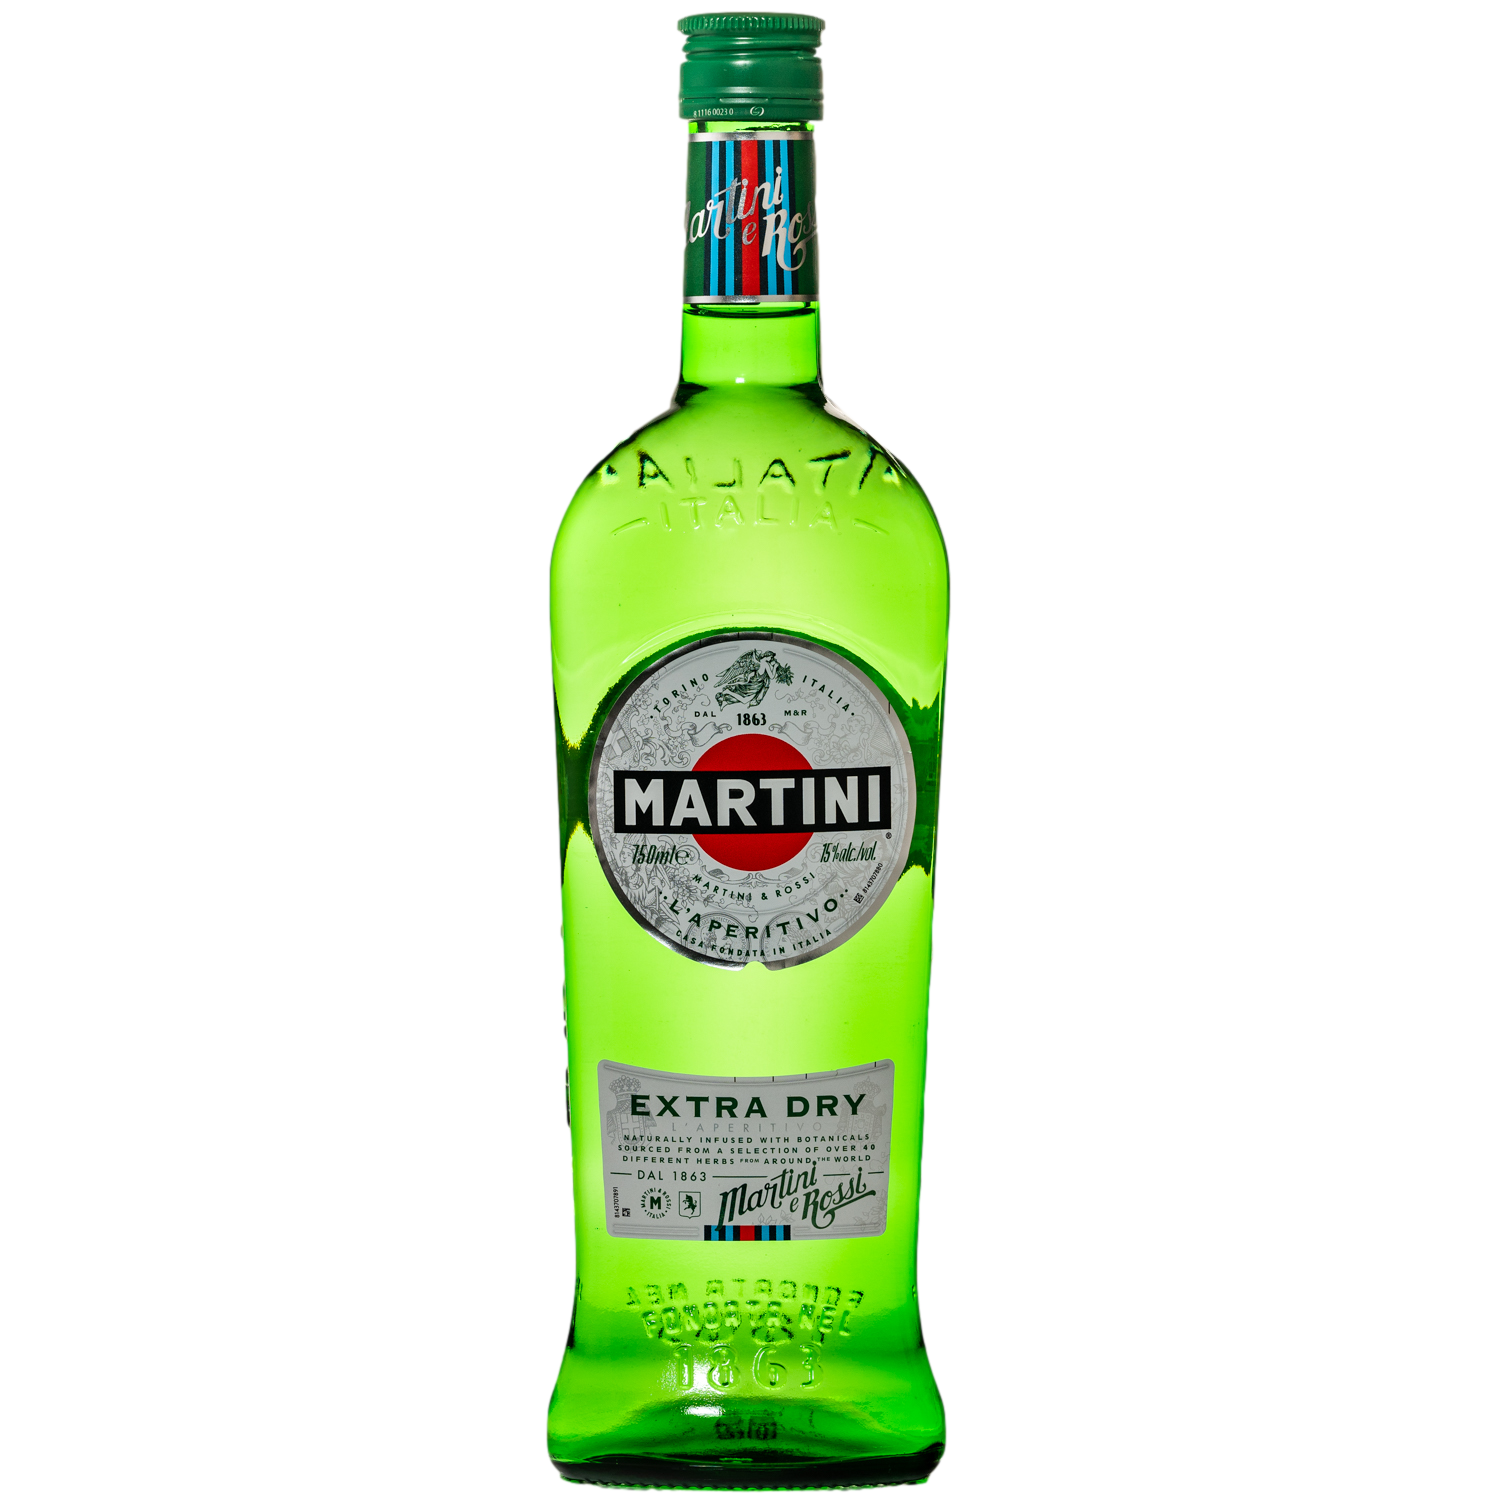 - Martini Brothers Barrel Dry Vermouth - Extra